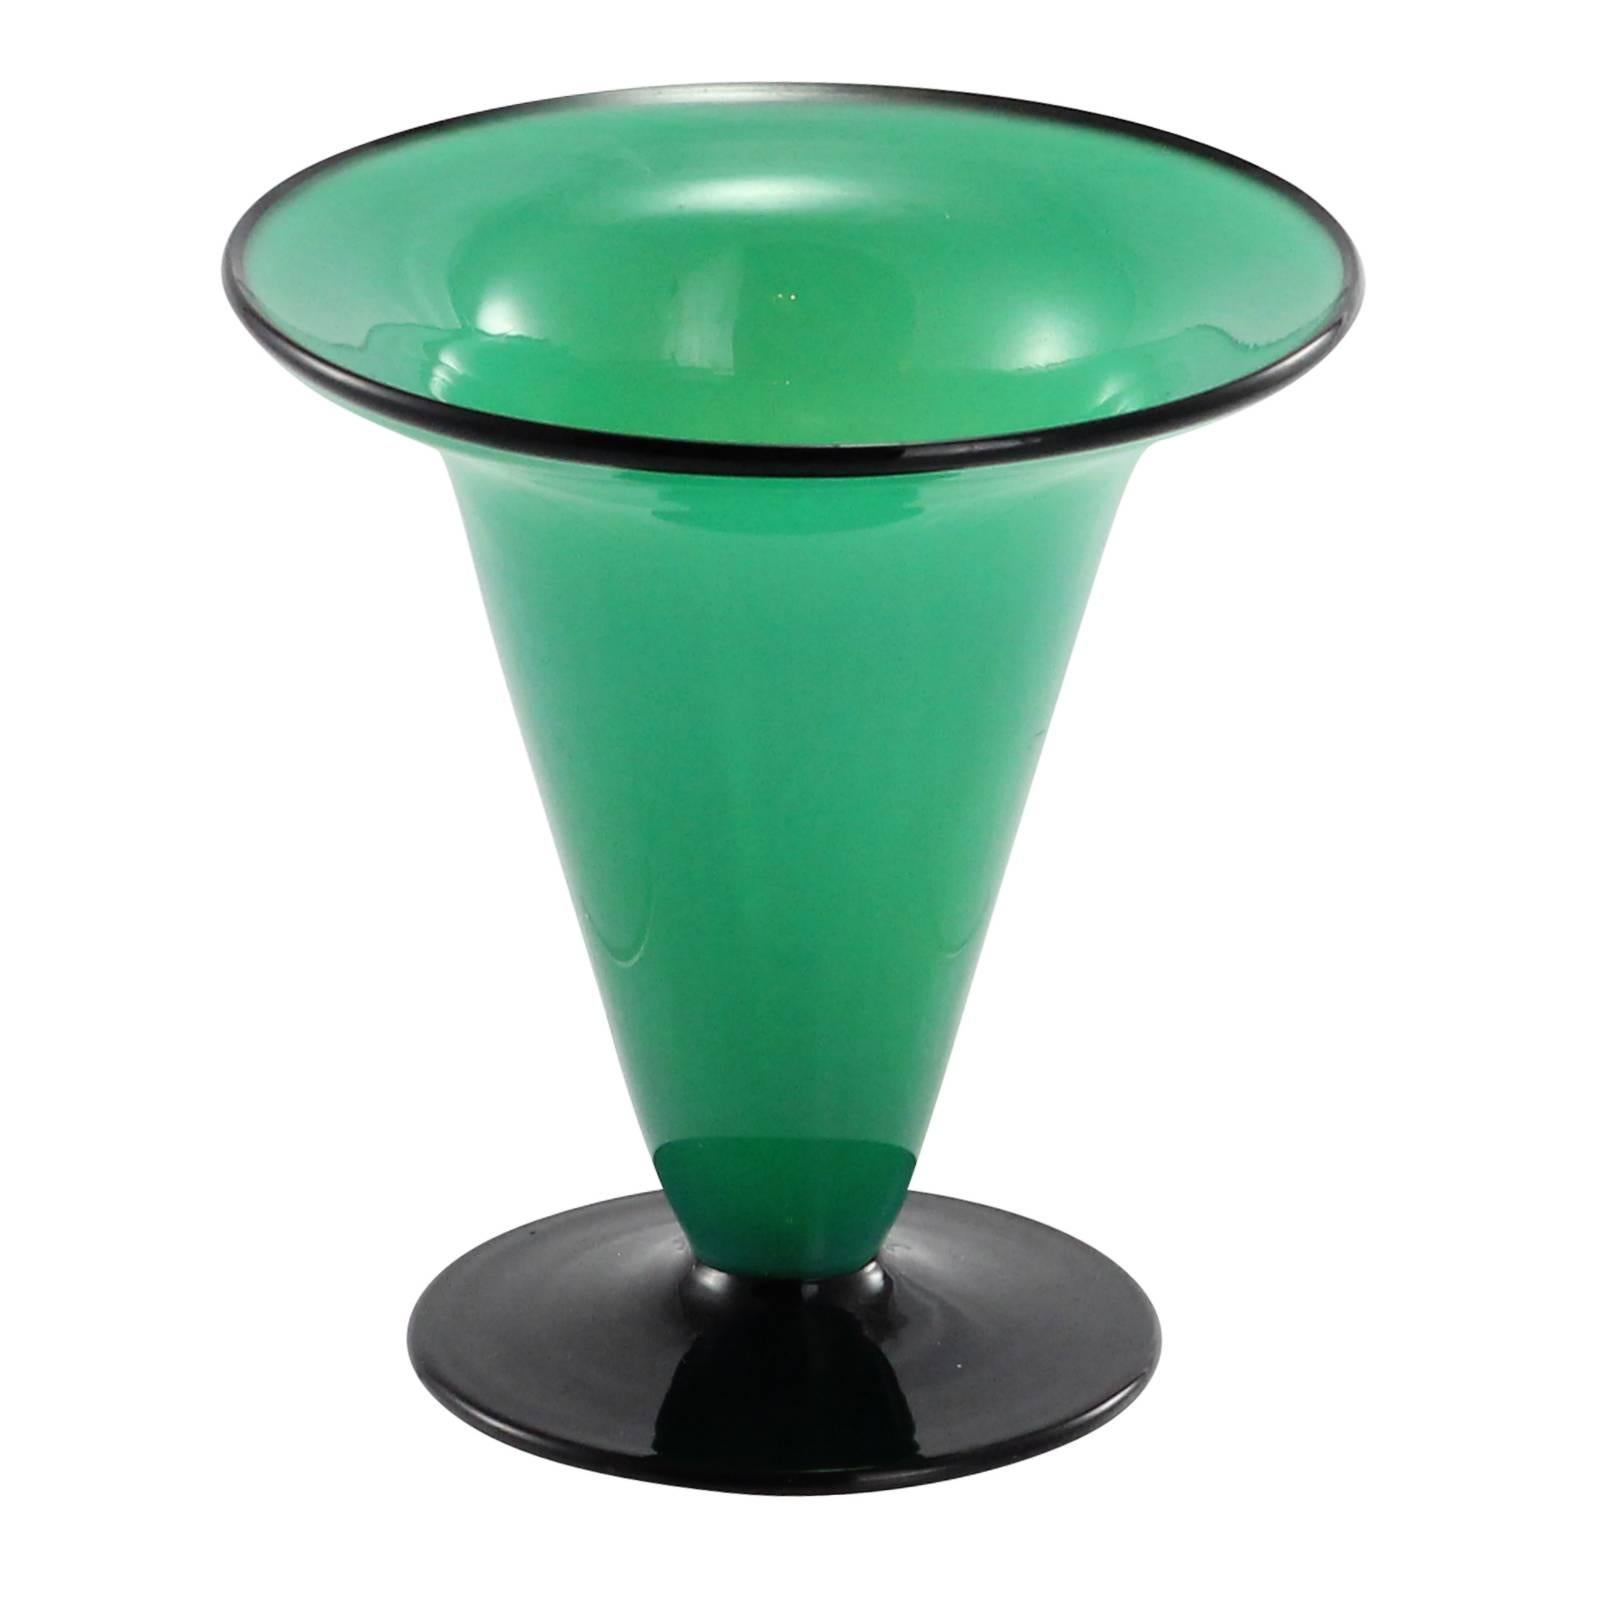 An early 20th century Art Deco green and black tango glass vase of the Ikora range by W.M.F. Identified by its recorded 5021 numbered color, this style of glass was the Württembergische Metallwarenfabrik's answer to the ever popular tango glass